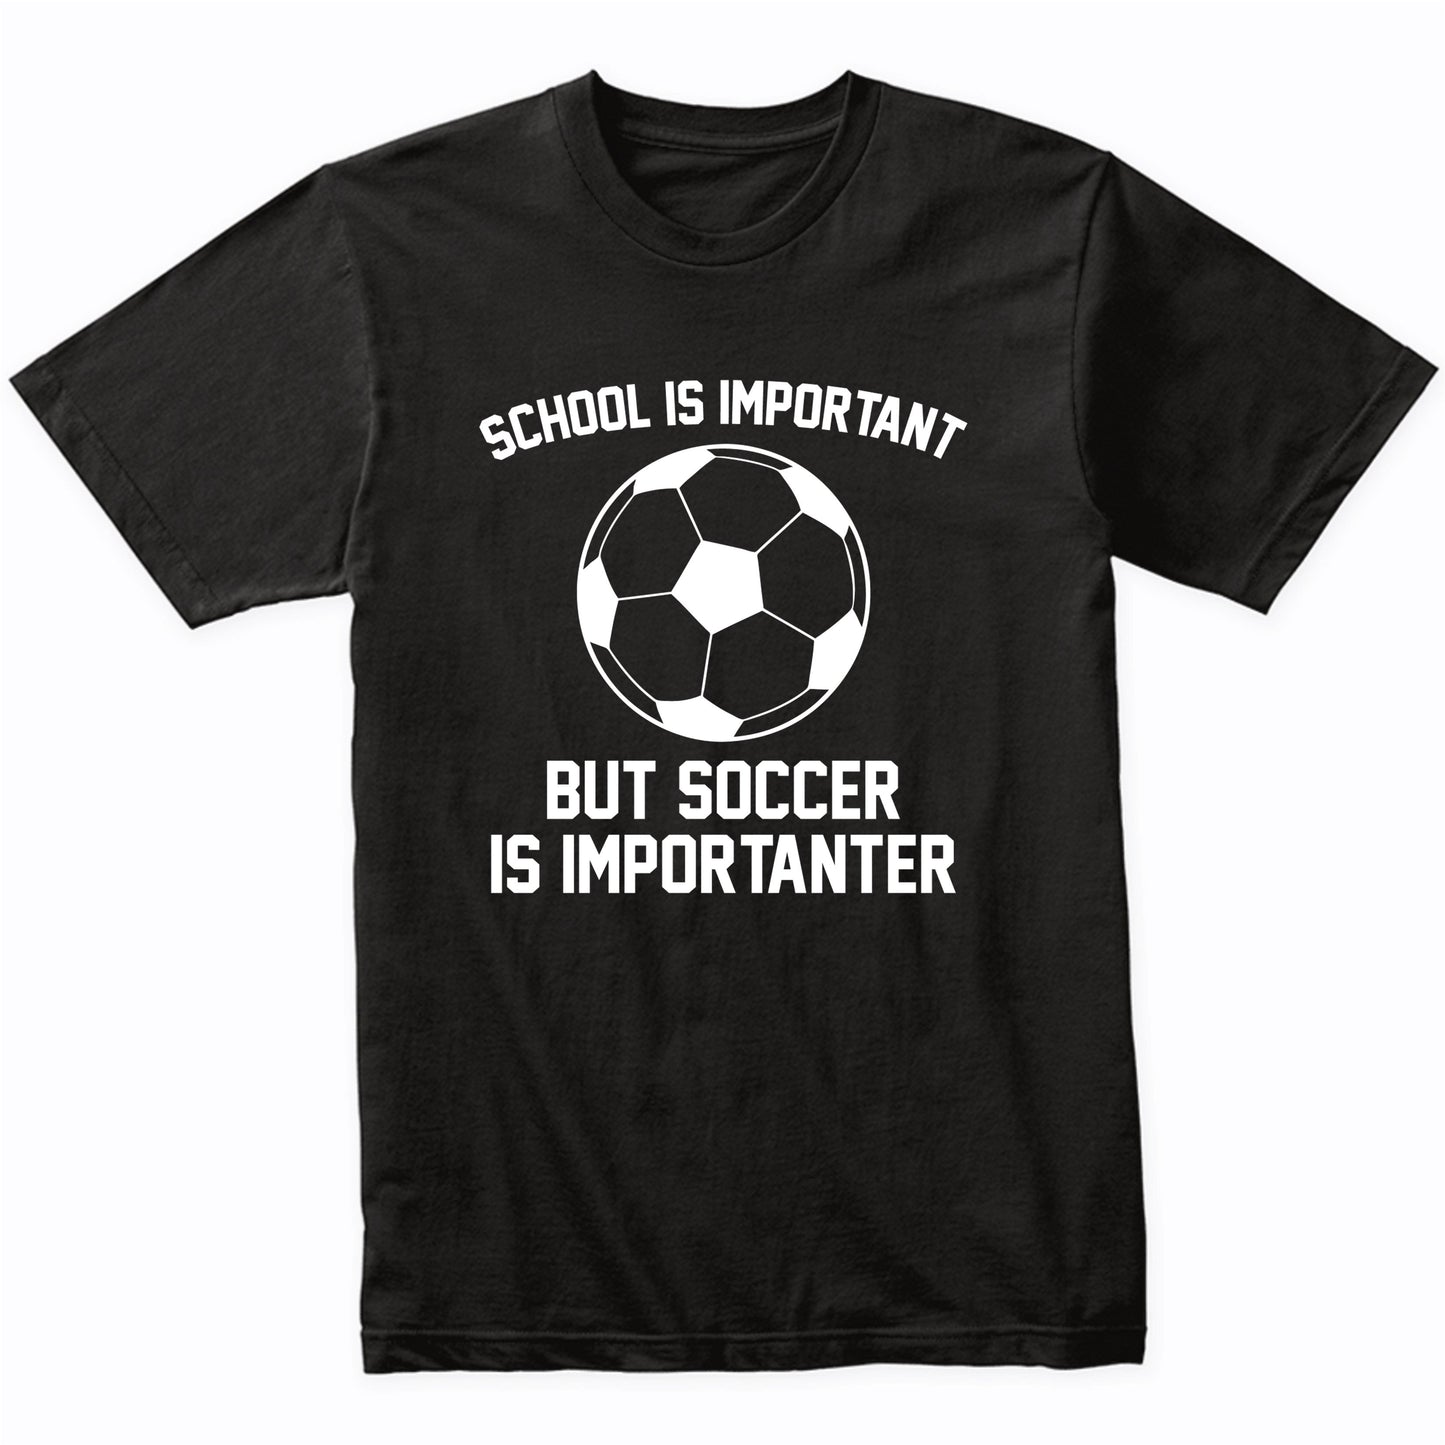 School Is Important But Soccer Is Importanter Funny Shirt